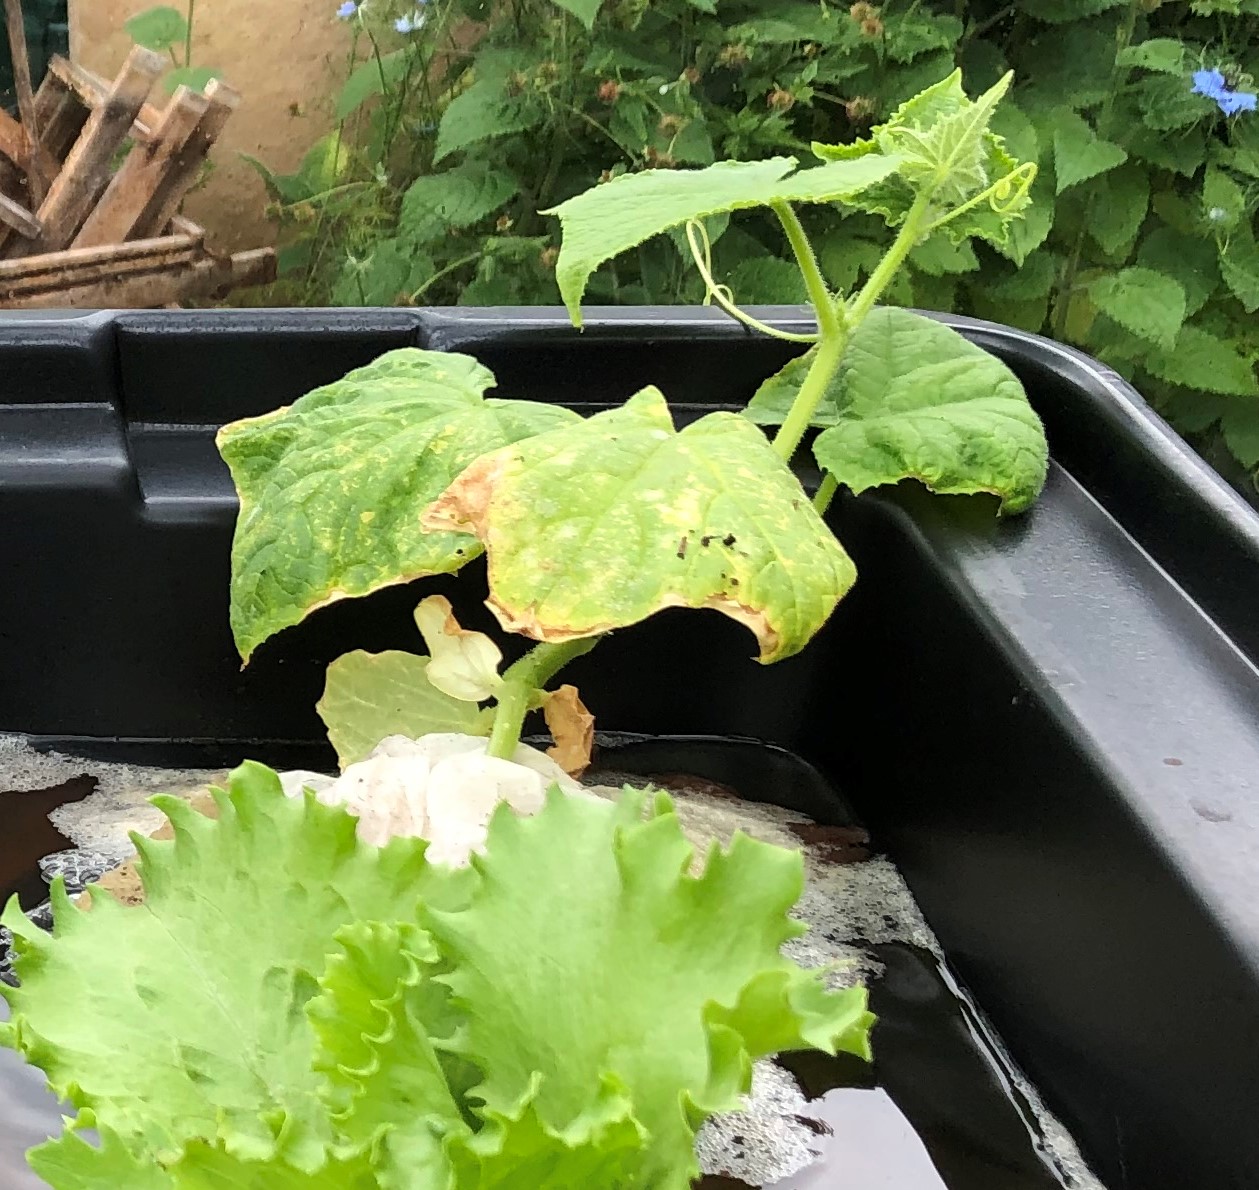 cucumber plant moved to hydroponic tank 6/6/20